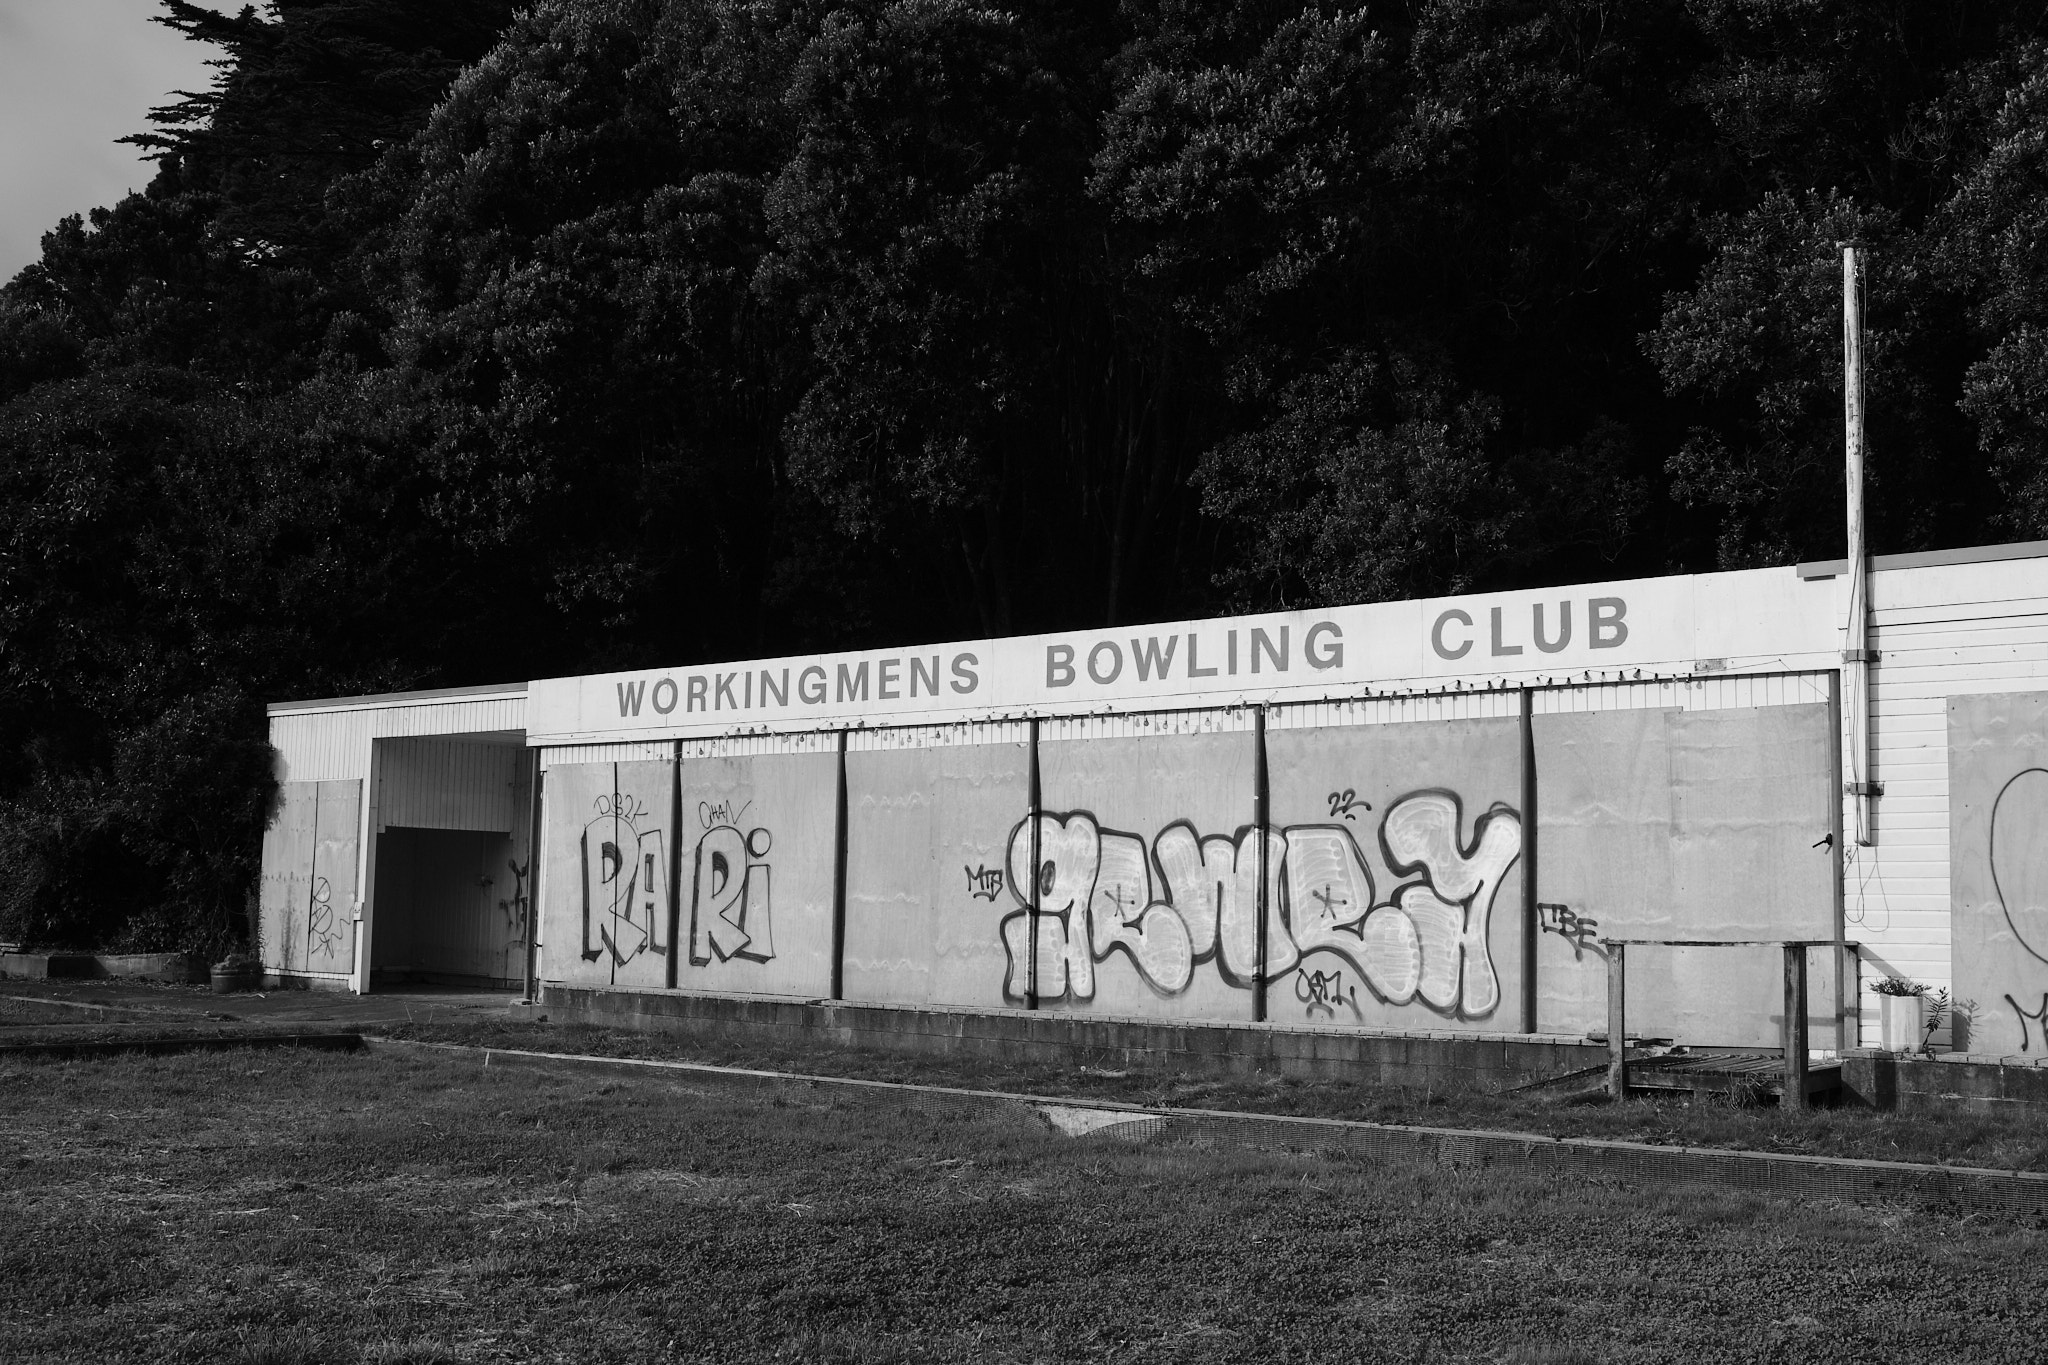 A boarded up building which reads 'WORKINGMENS BOWLING CLUB'.